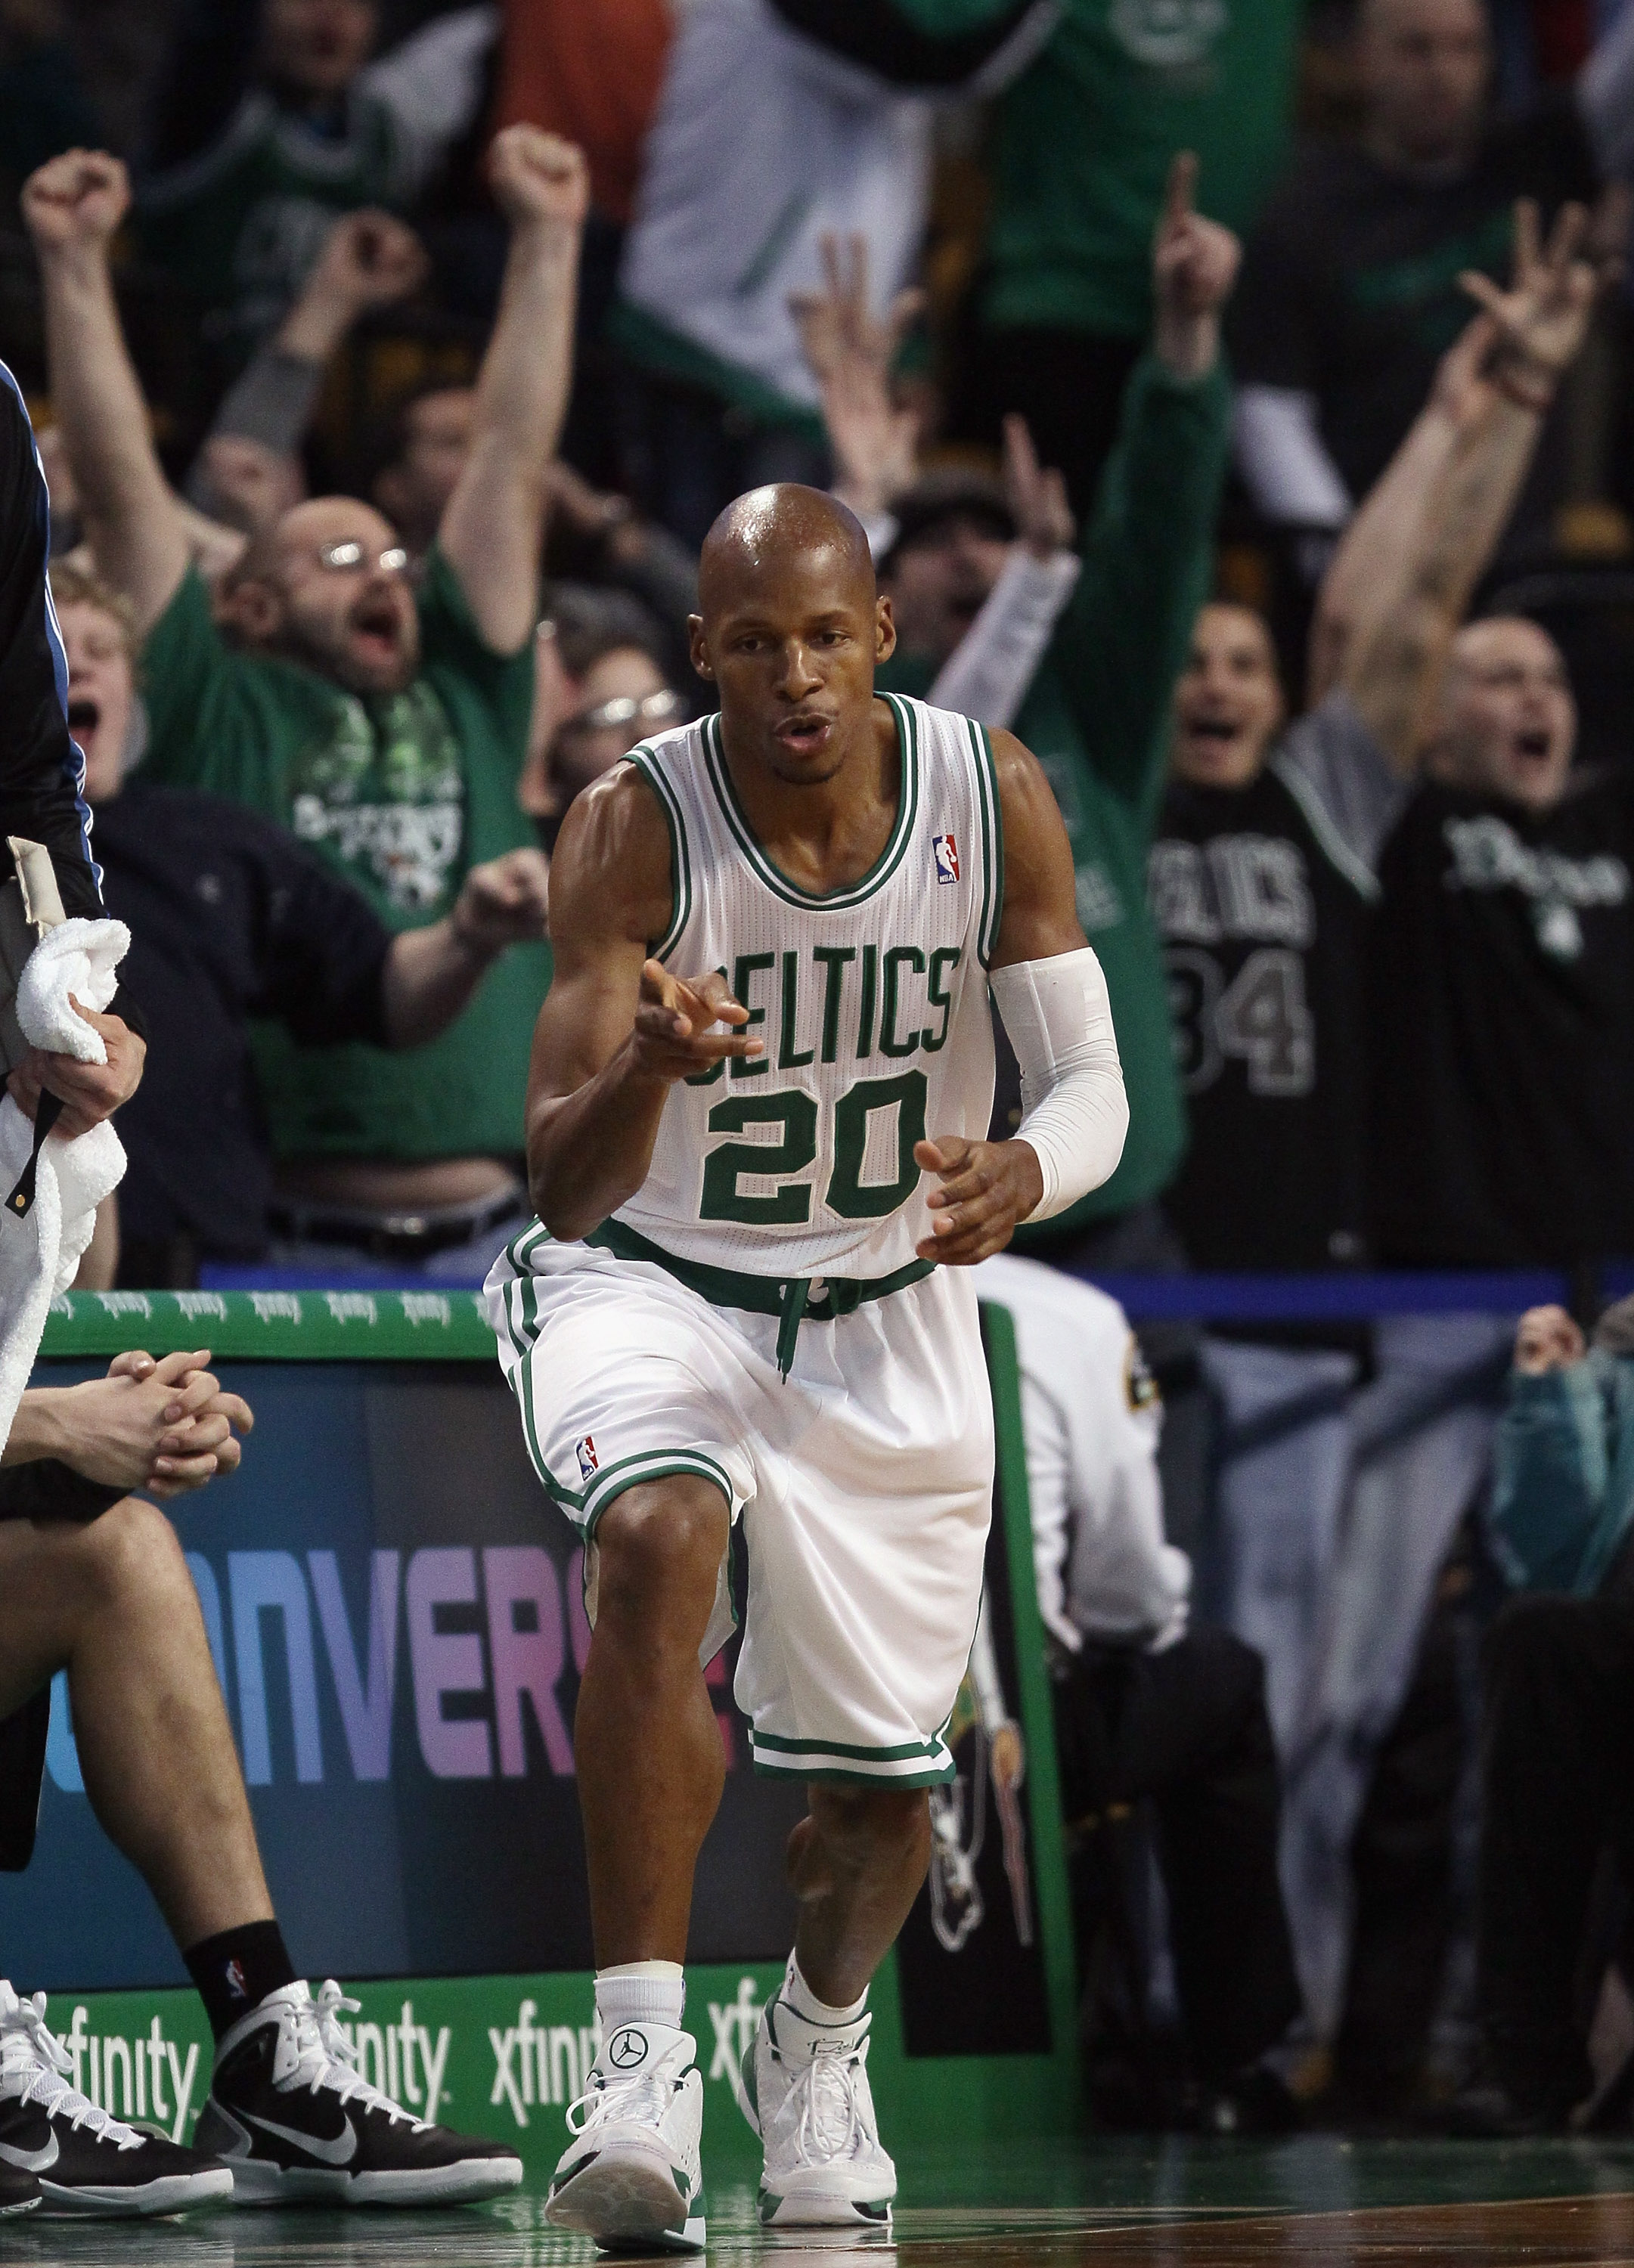 Ray Allen: The Greatest Shooter in NBA History